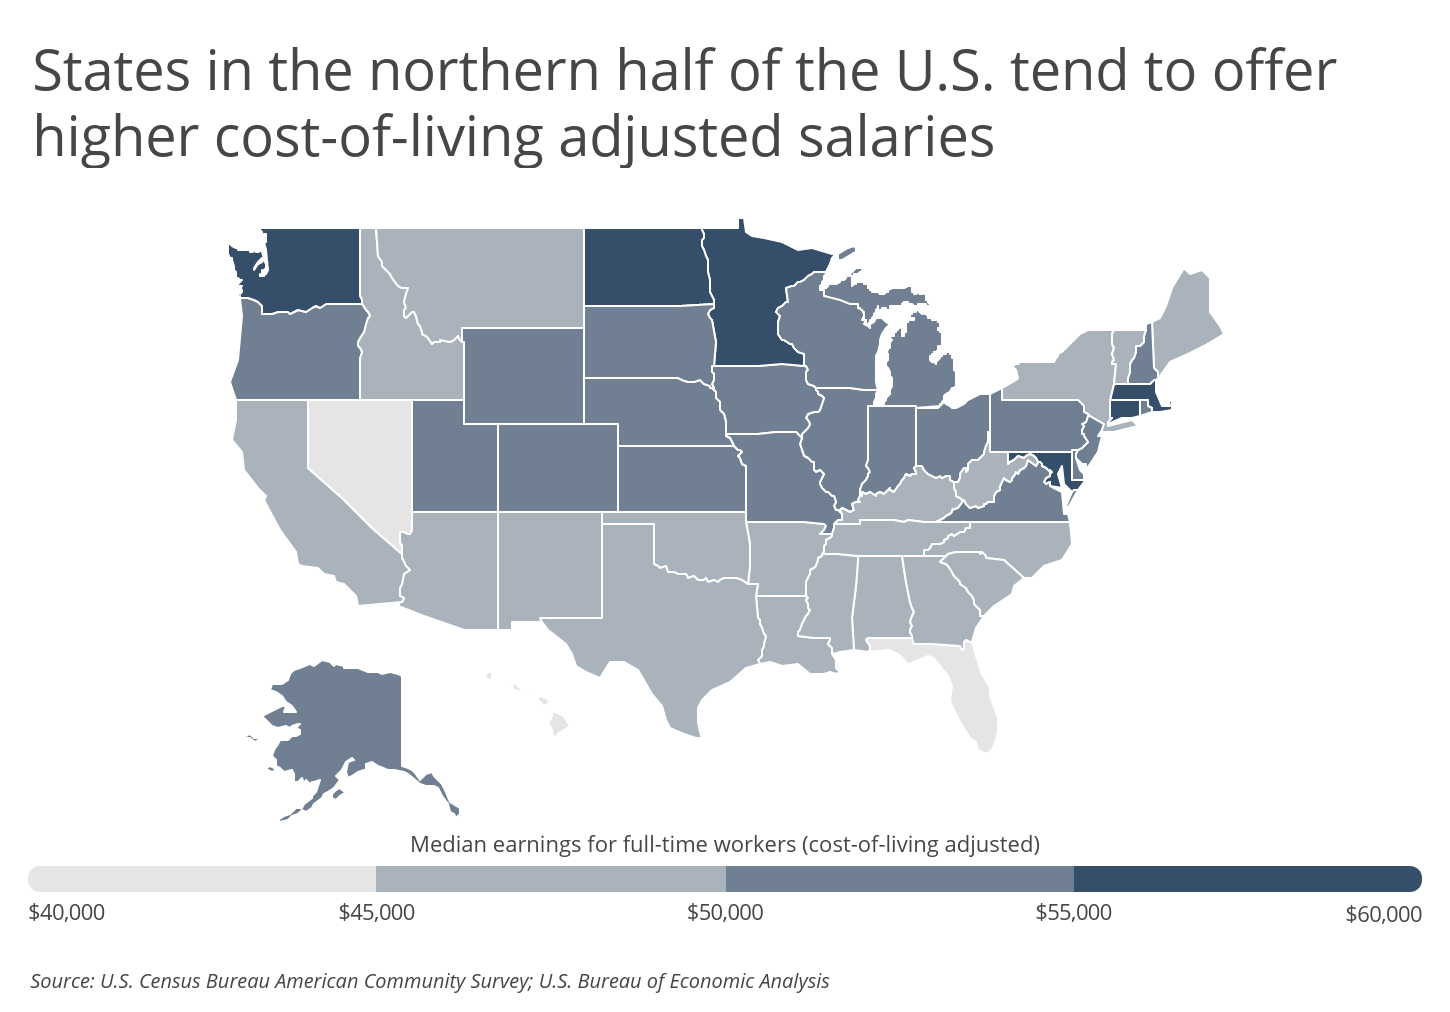 Chart2 Northern states tend to offer higher adjusted salaries